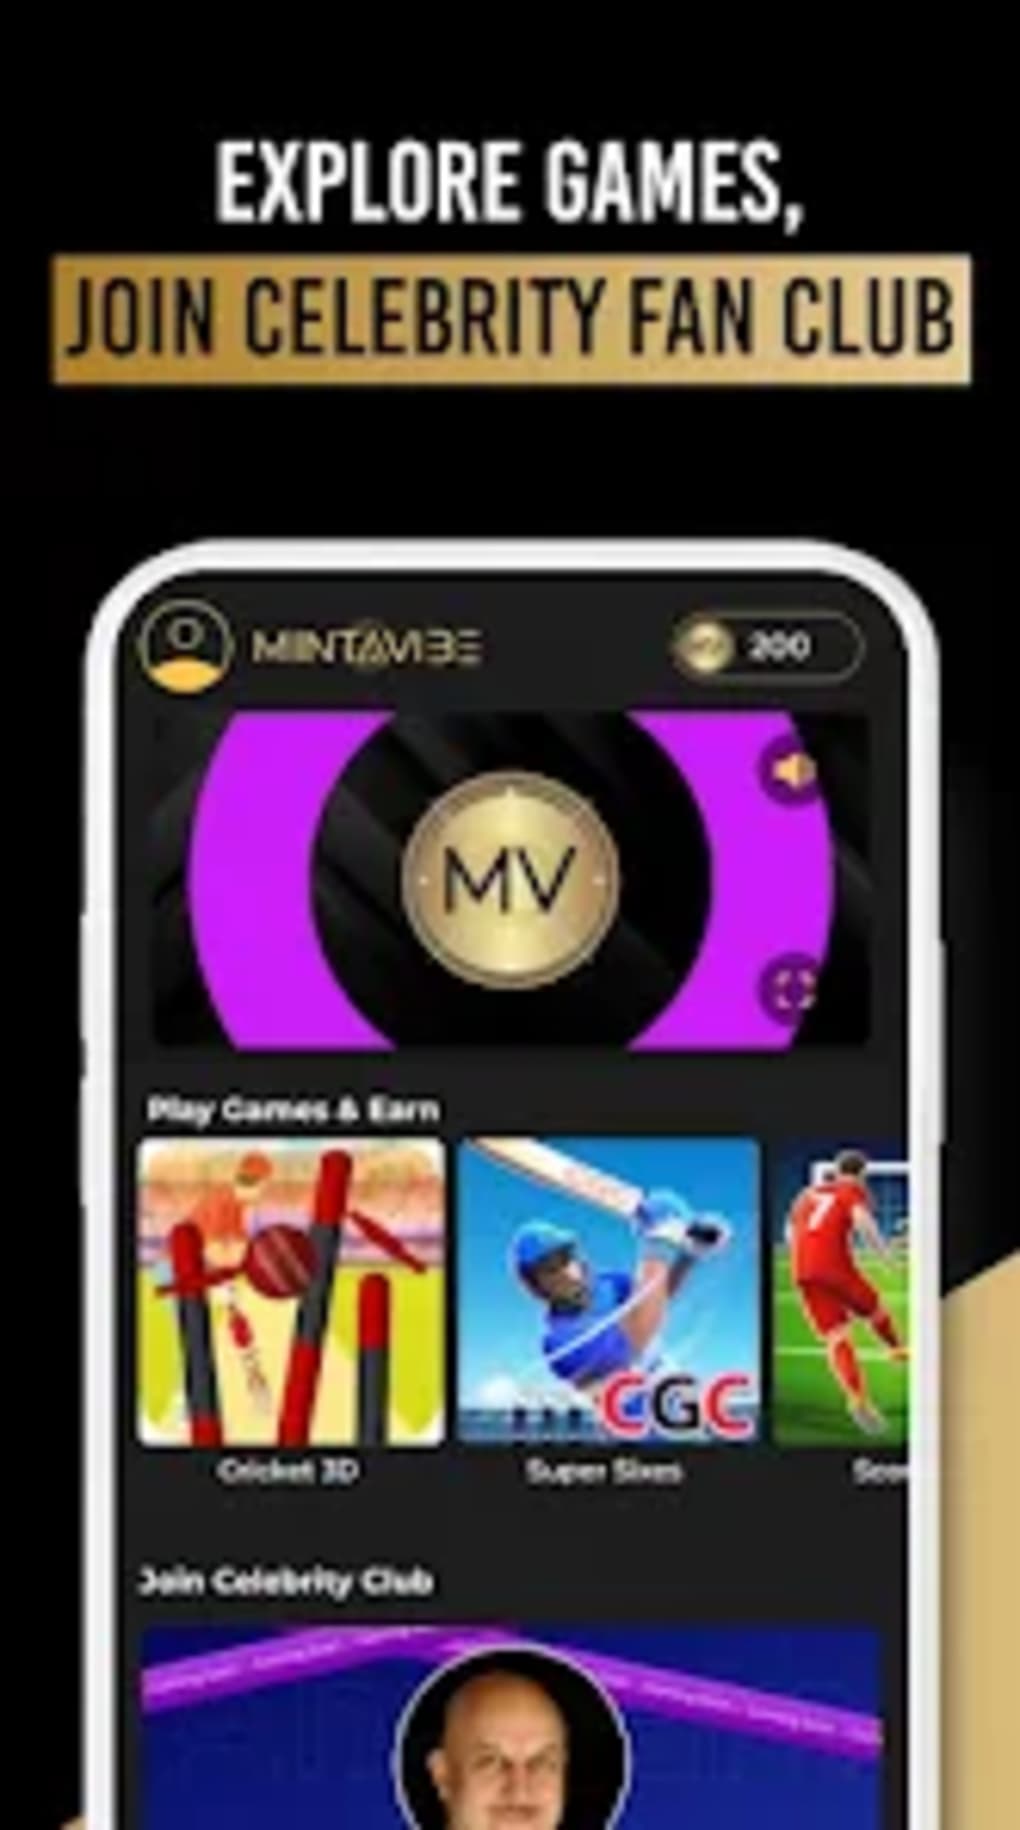 MintAVibe - MintAVibe updated their profile picture.